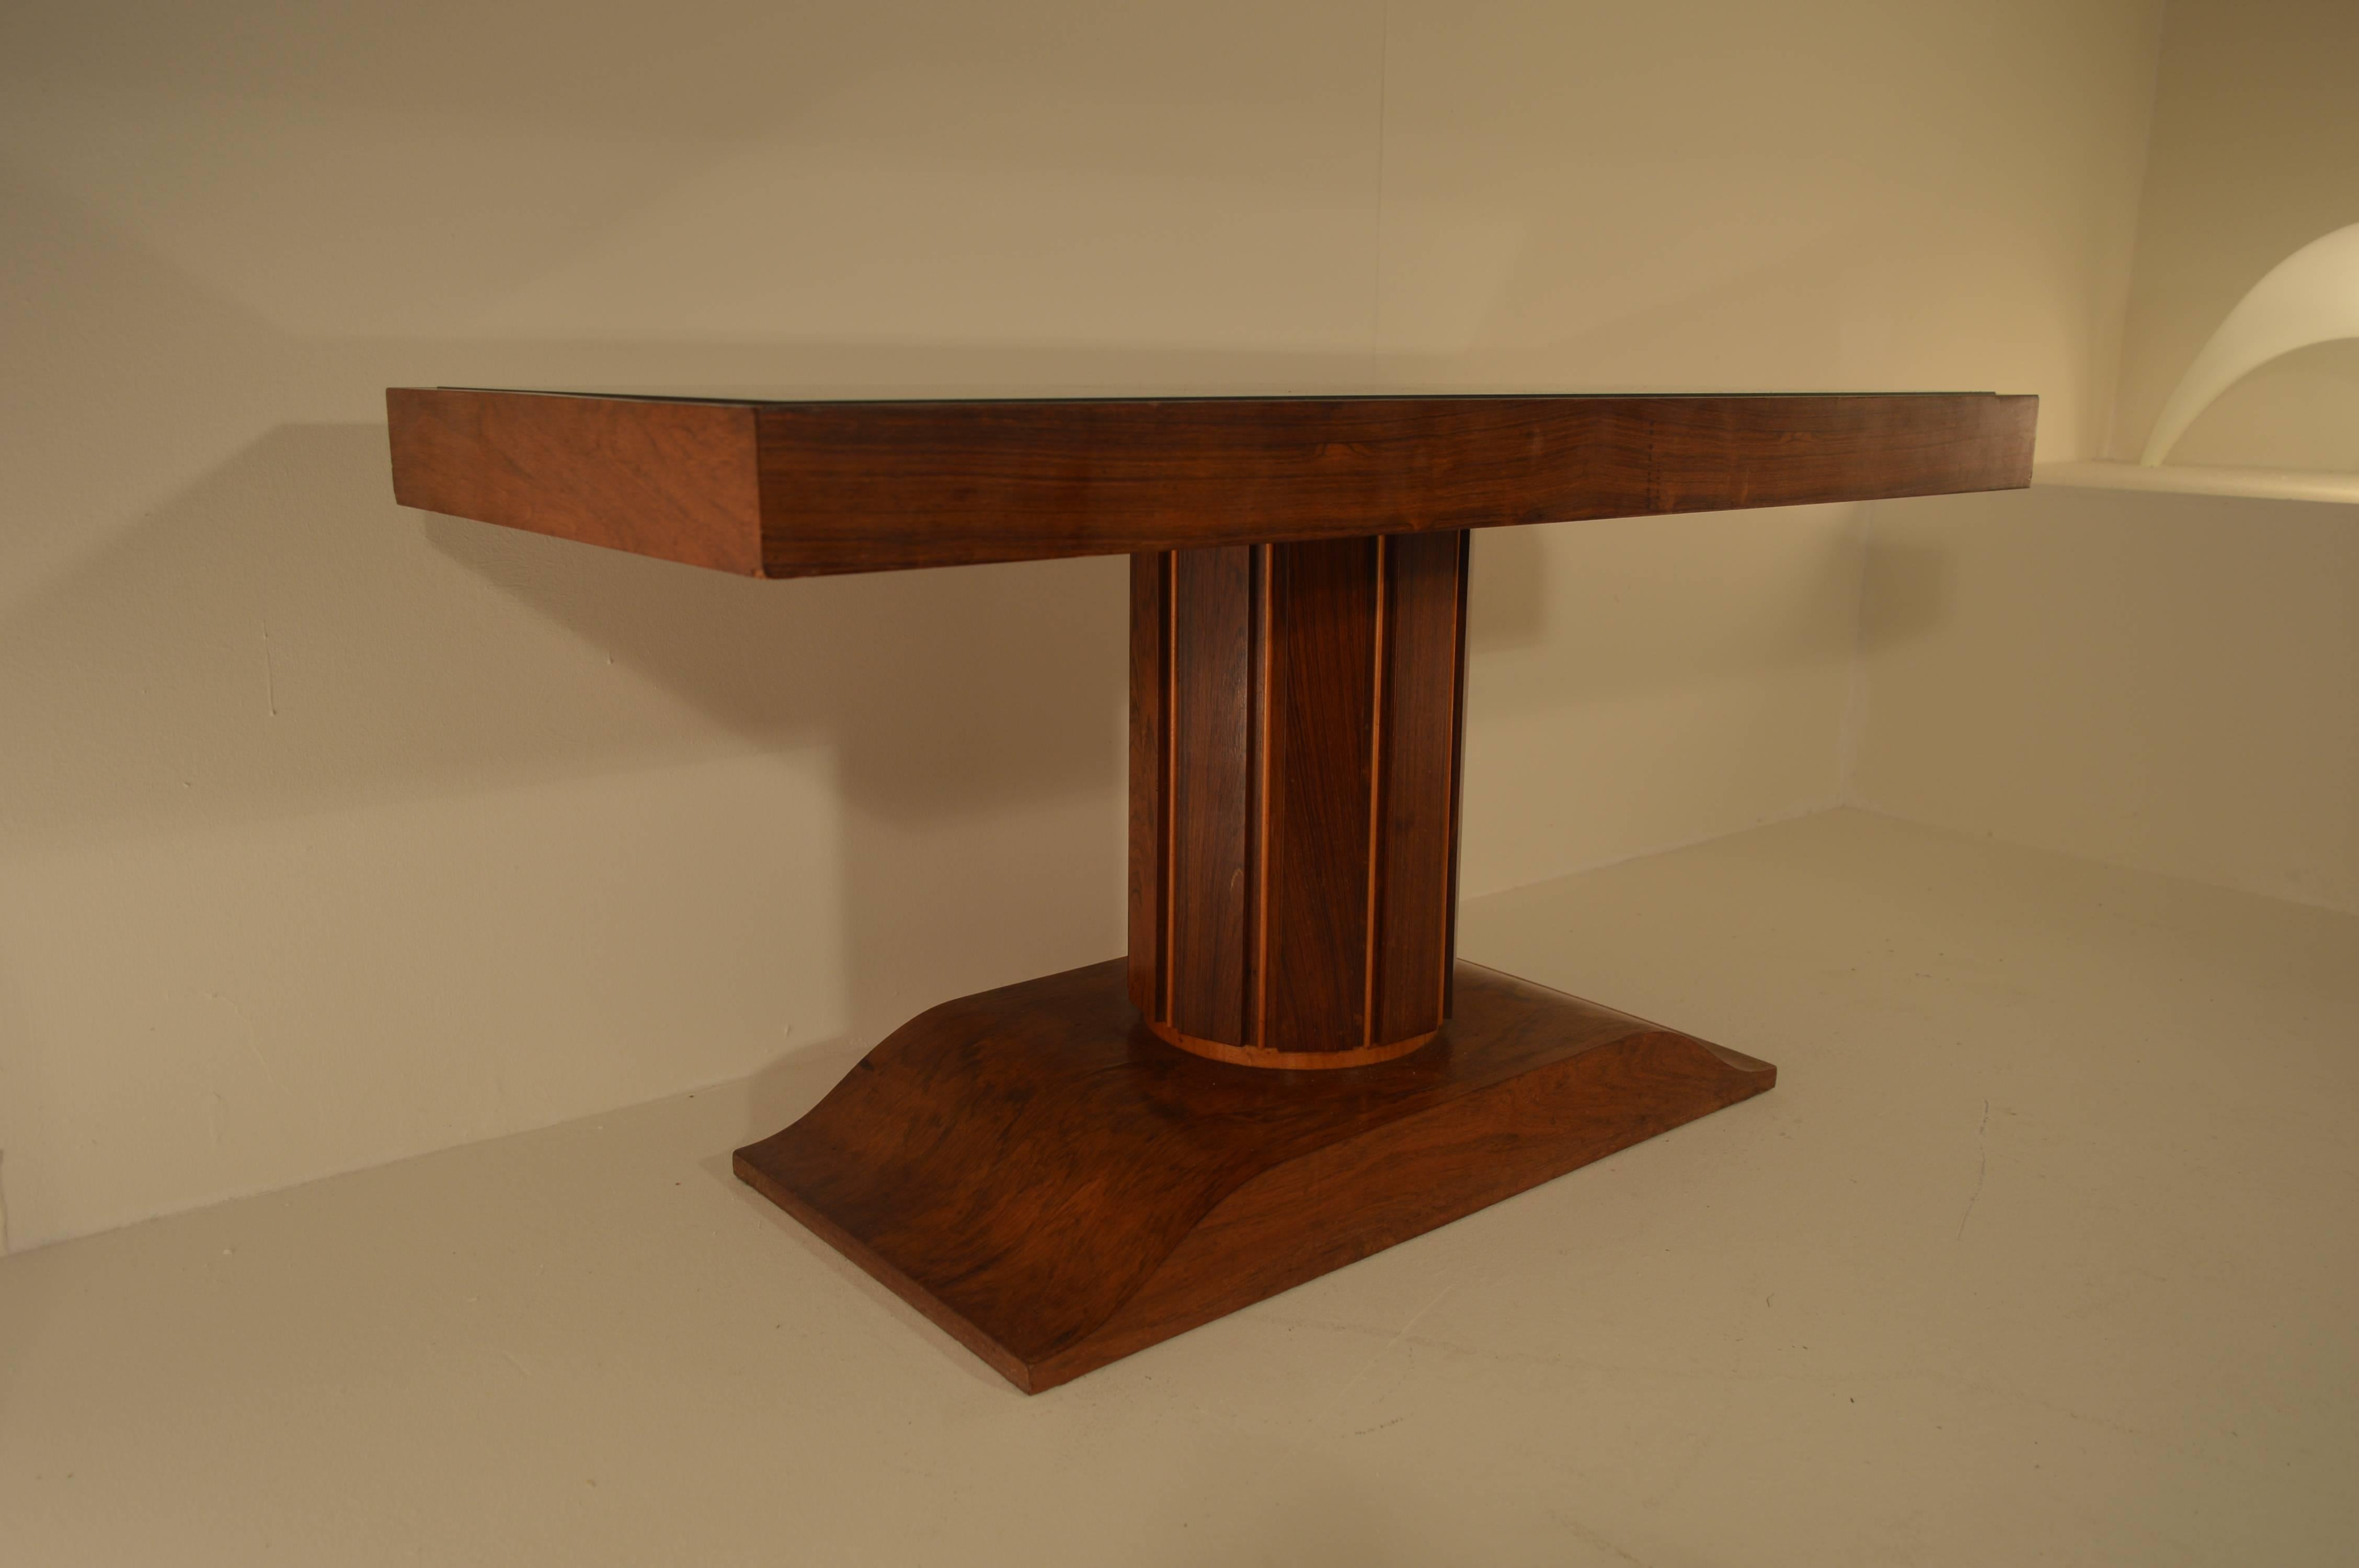 Beautiful Art Deco side or Coffee table in rosewood combined with sycamore.
The table remains in a good original condition.